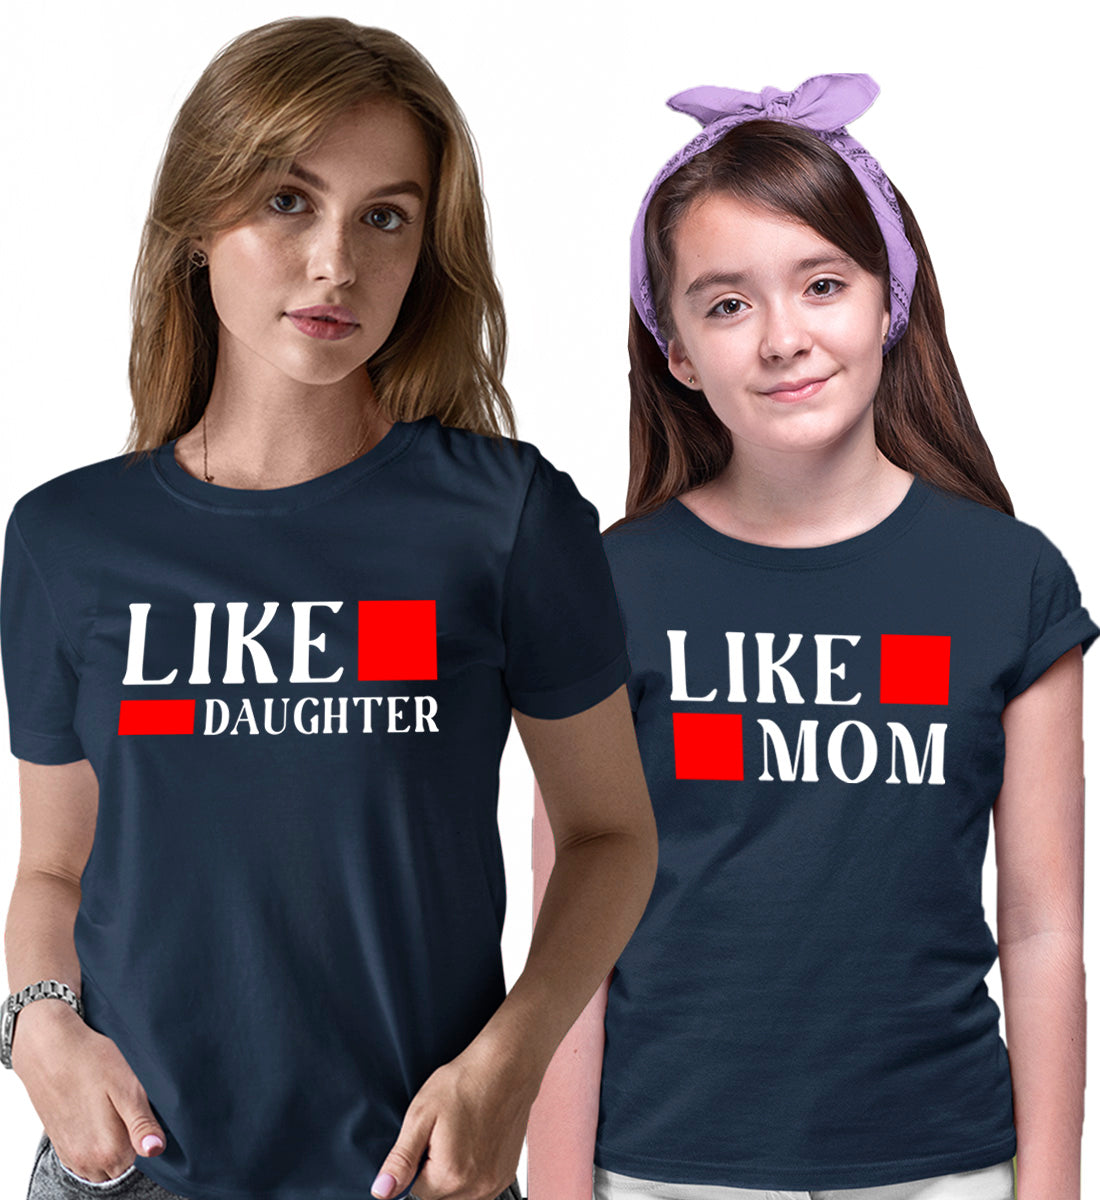 Mother - Daughter Matching Printed Tshirts (Pack Of 2)